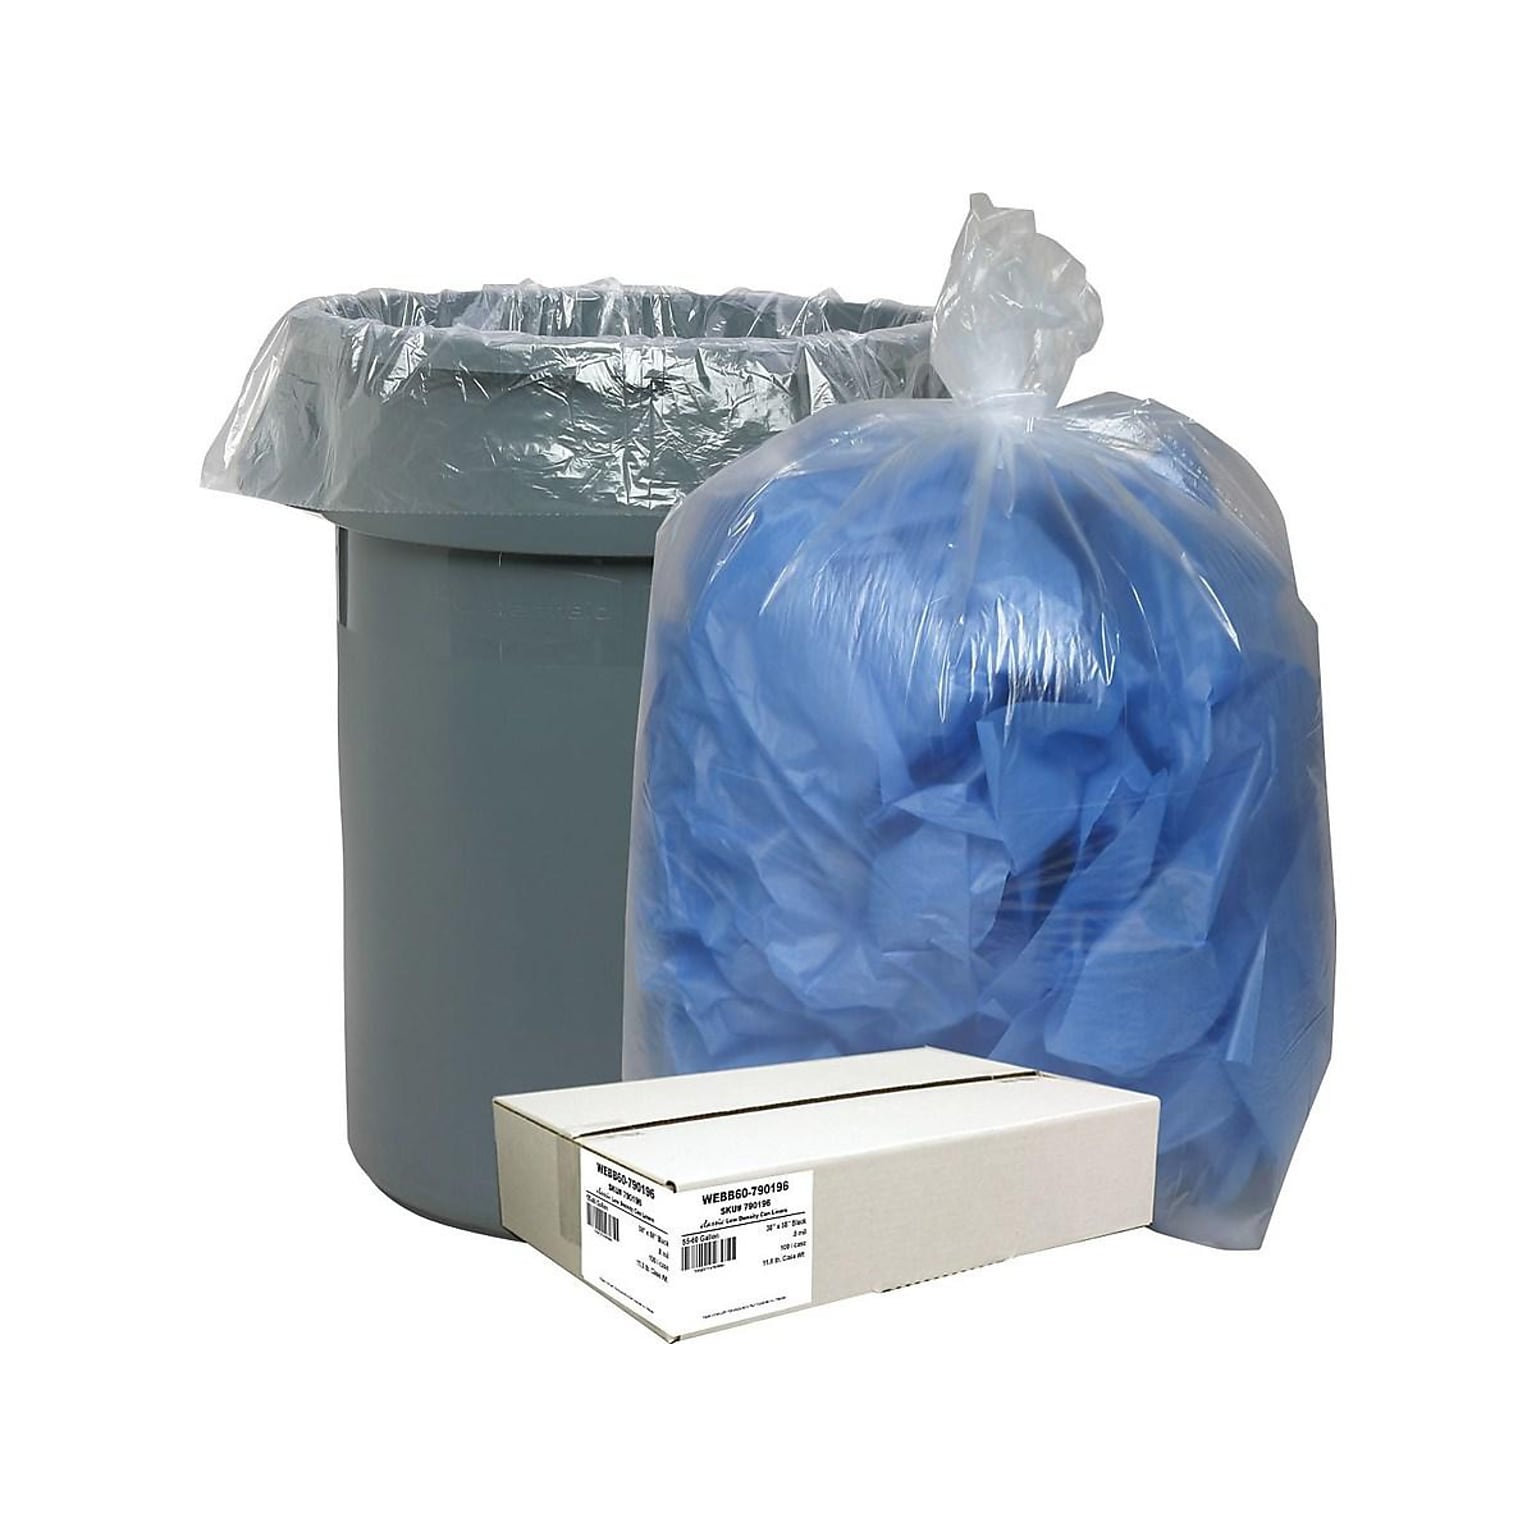 Berry Global Classic 60 Gallon Industrial Trash Bag, 38 x 58, Low Density, 0.9 mil, Clear, 100 Bags/Box (WEBBC60-538991)